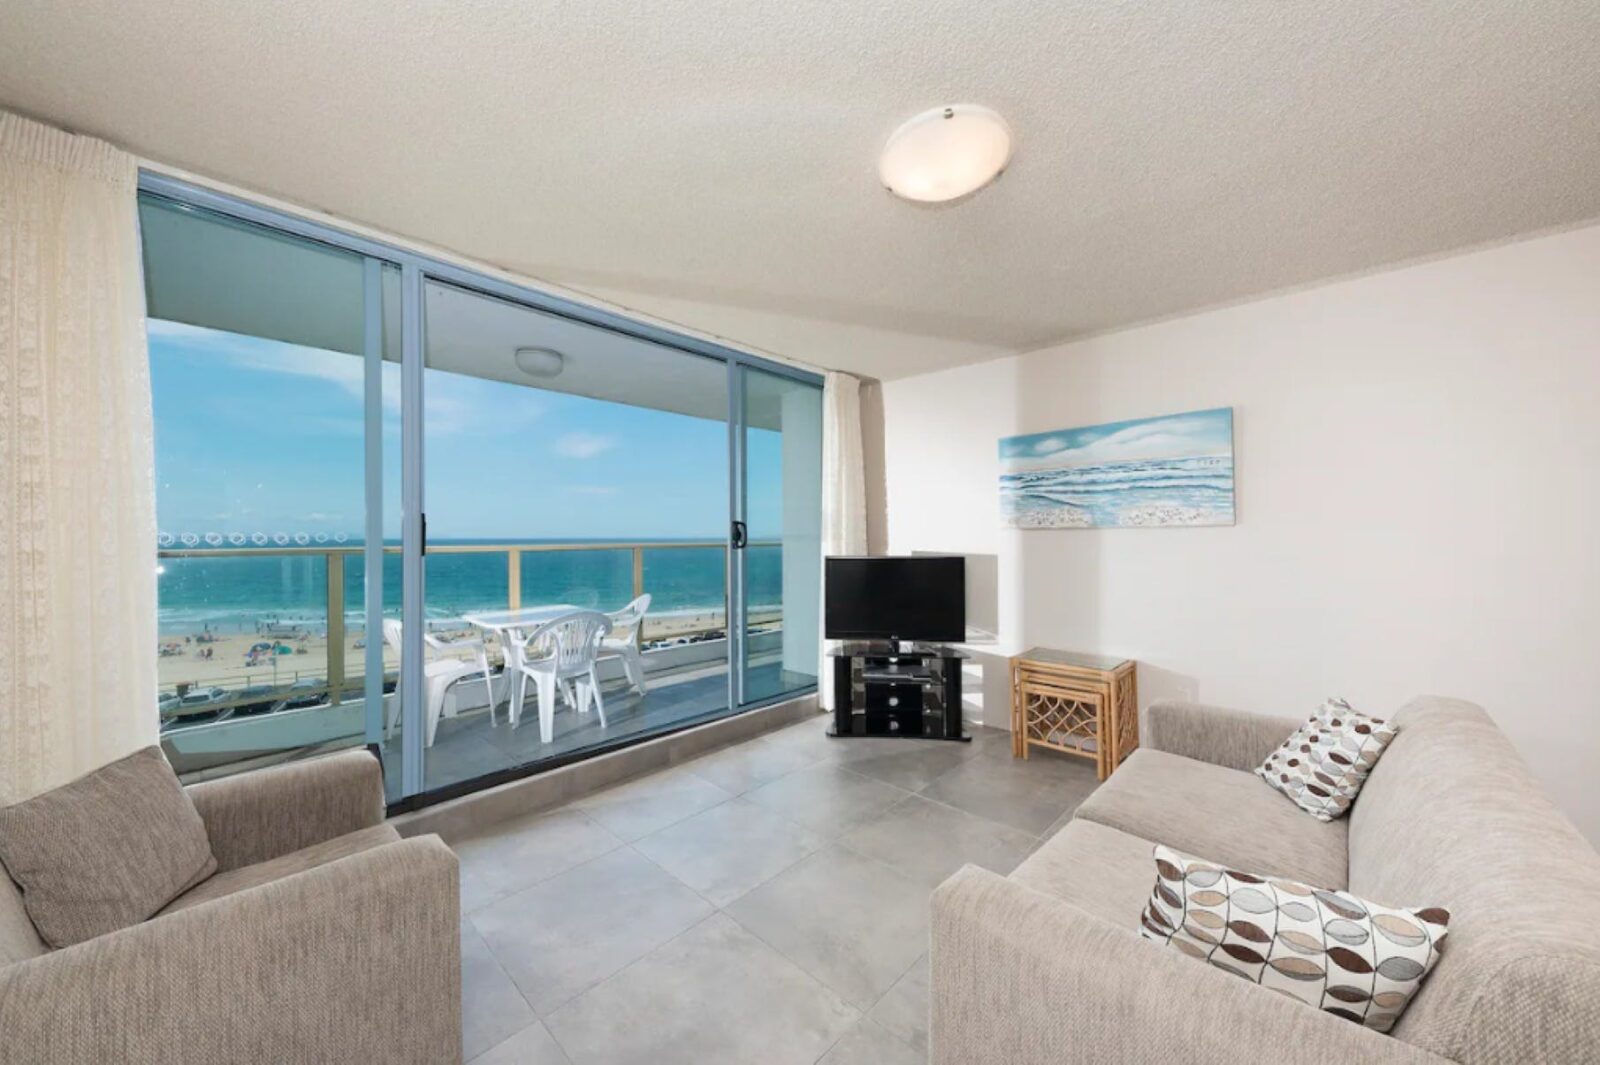 Loungeroom with lounges, TV, leading out to balcony with uninterrupted beach views, casual setting